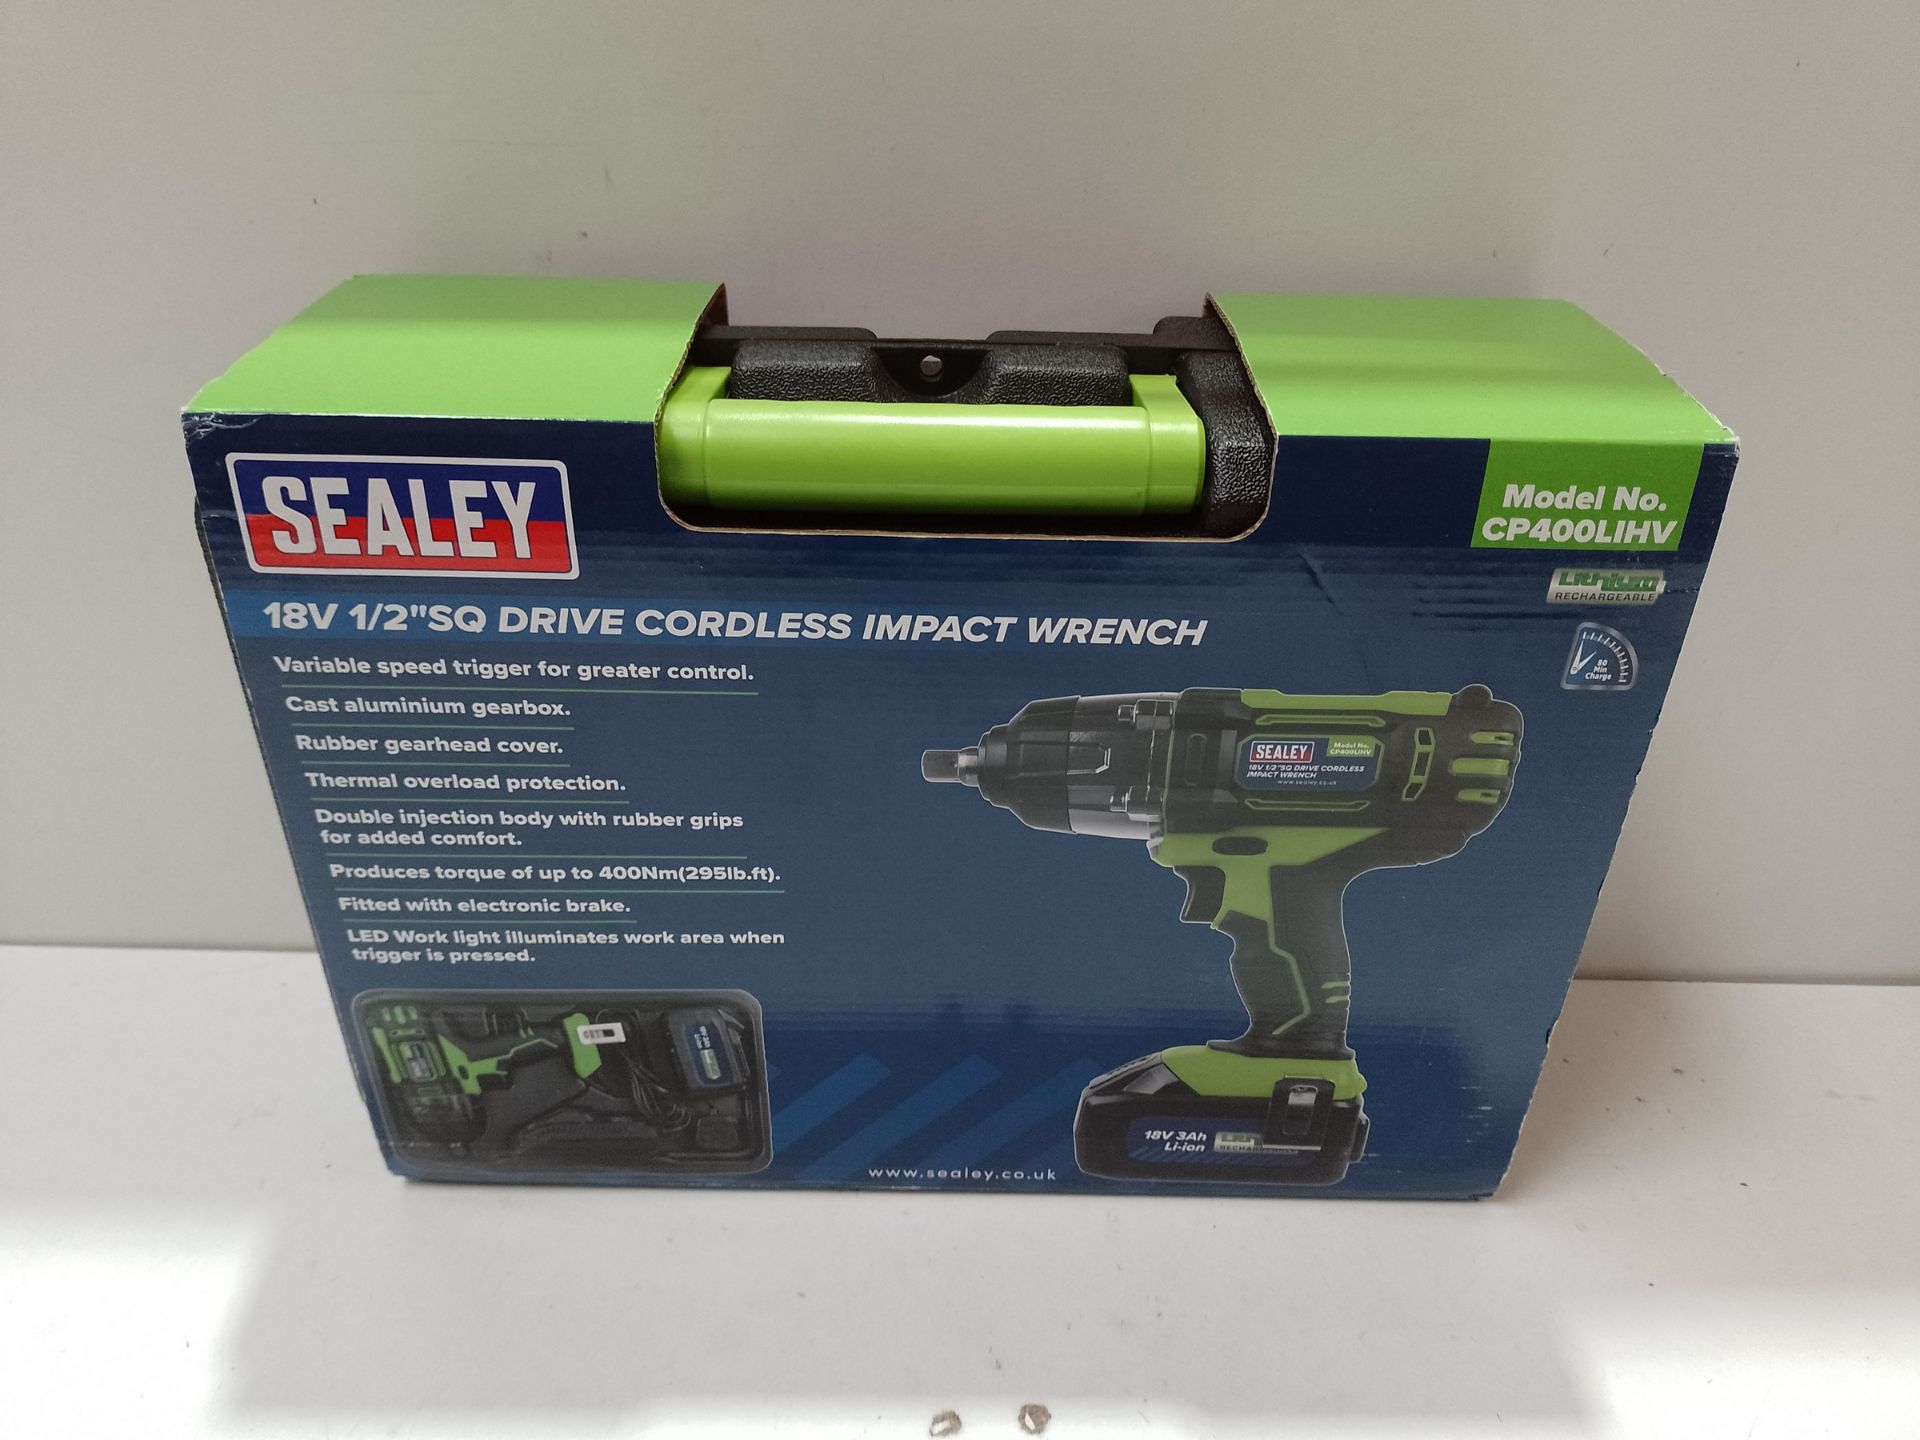 RRP £110.72 Sealey 18V 1/2" Sq Drive Cordless Impact Wrench - Green - Image 2 of 2